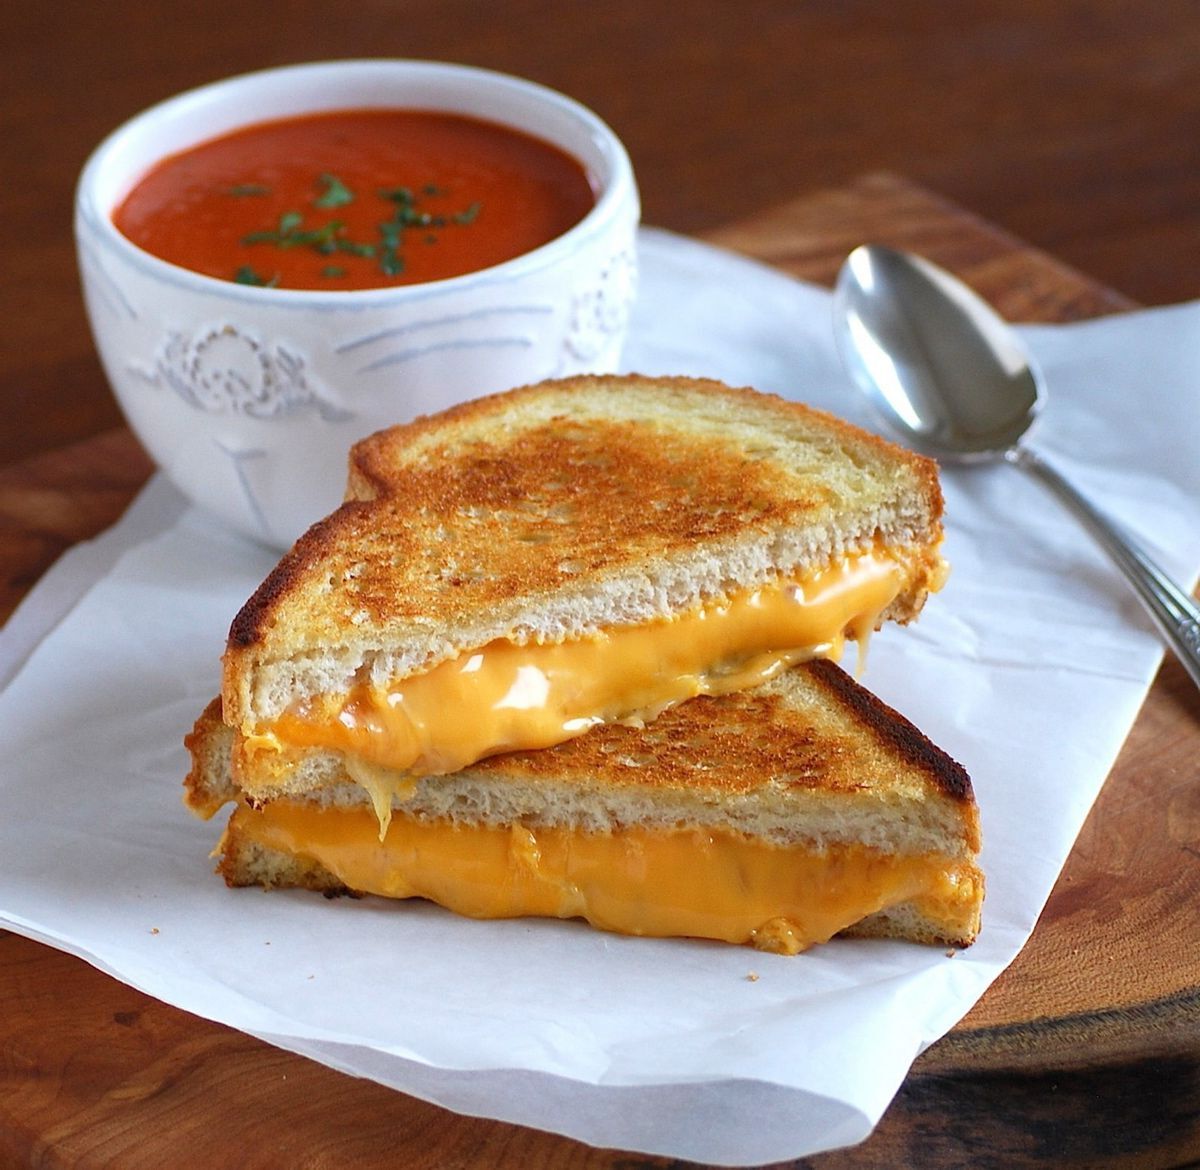 grilled cheese sandwich 🥪 with a side of tomato soup.jpg